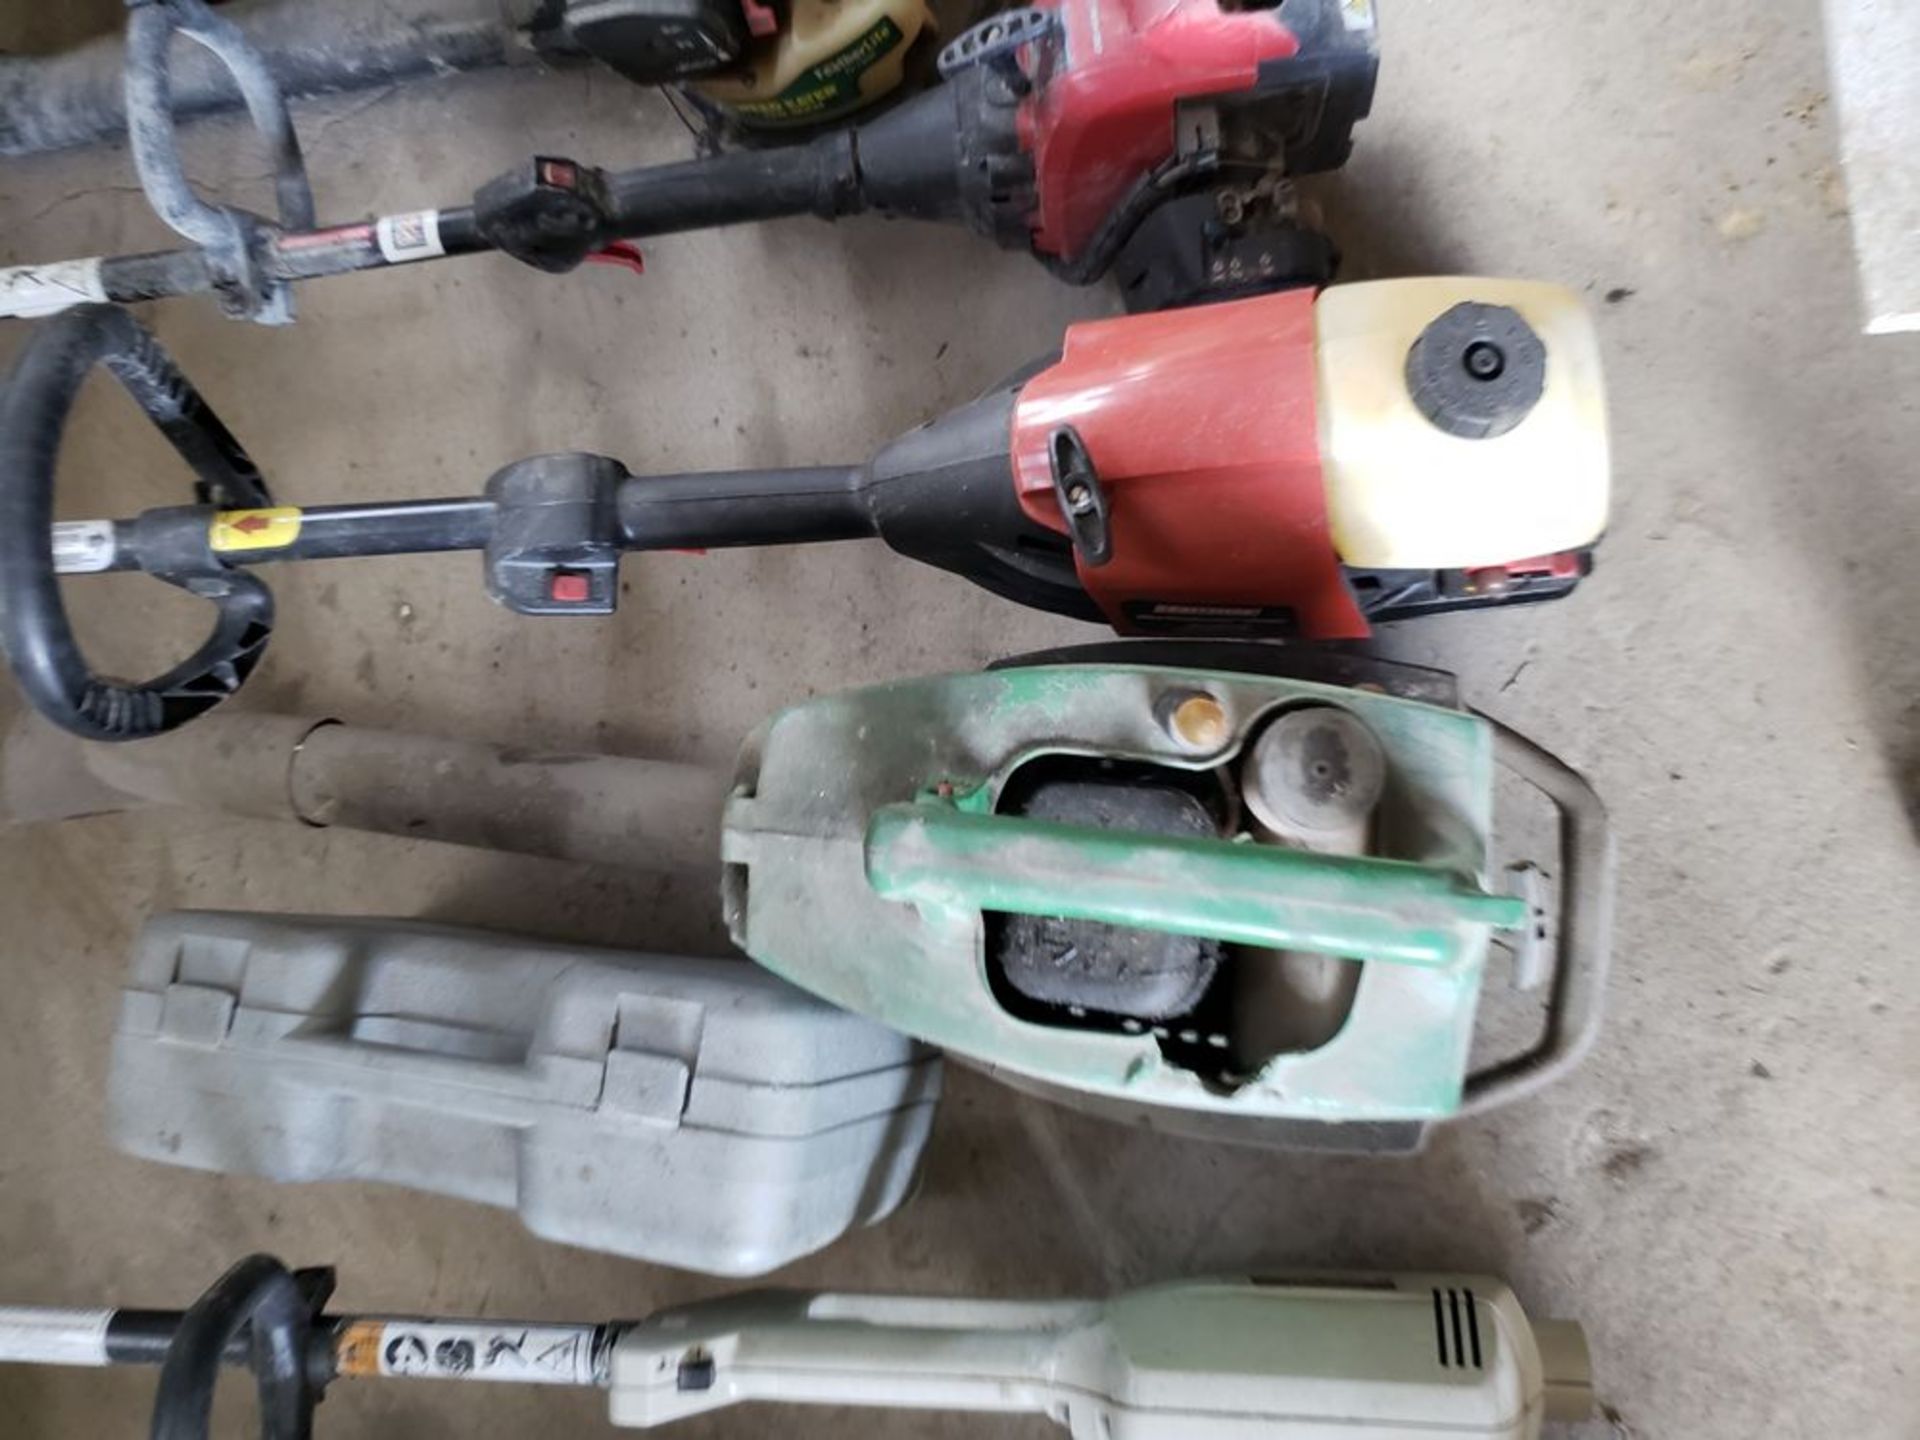 LOT OF LAWN EQUIPMENT BLOWERS, TRIMMERS - 7 ITEMS - Image 3 of 6